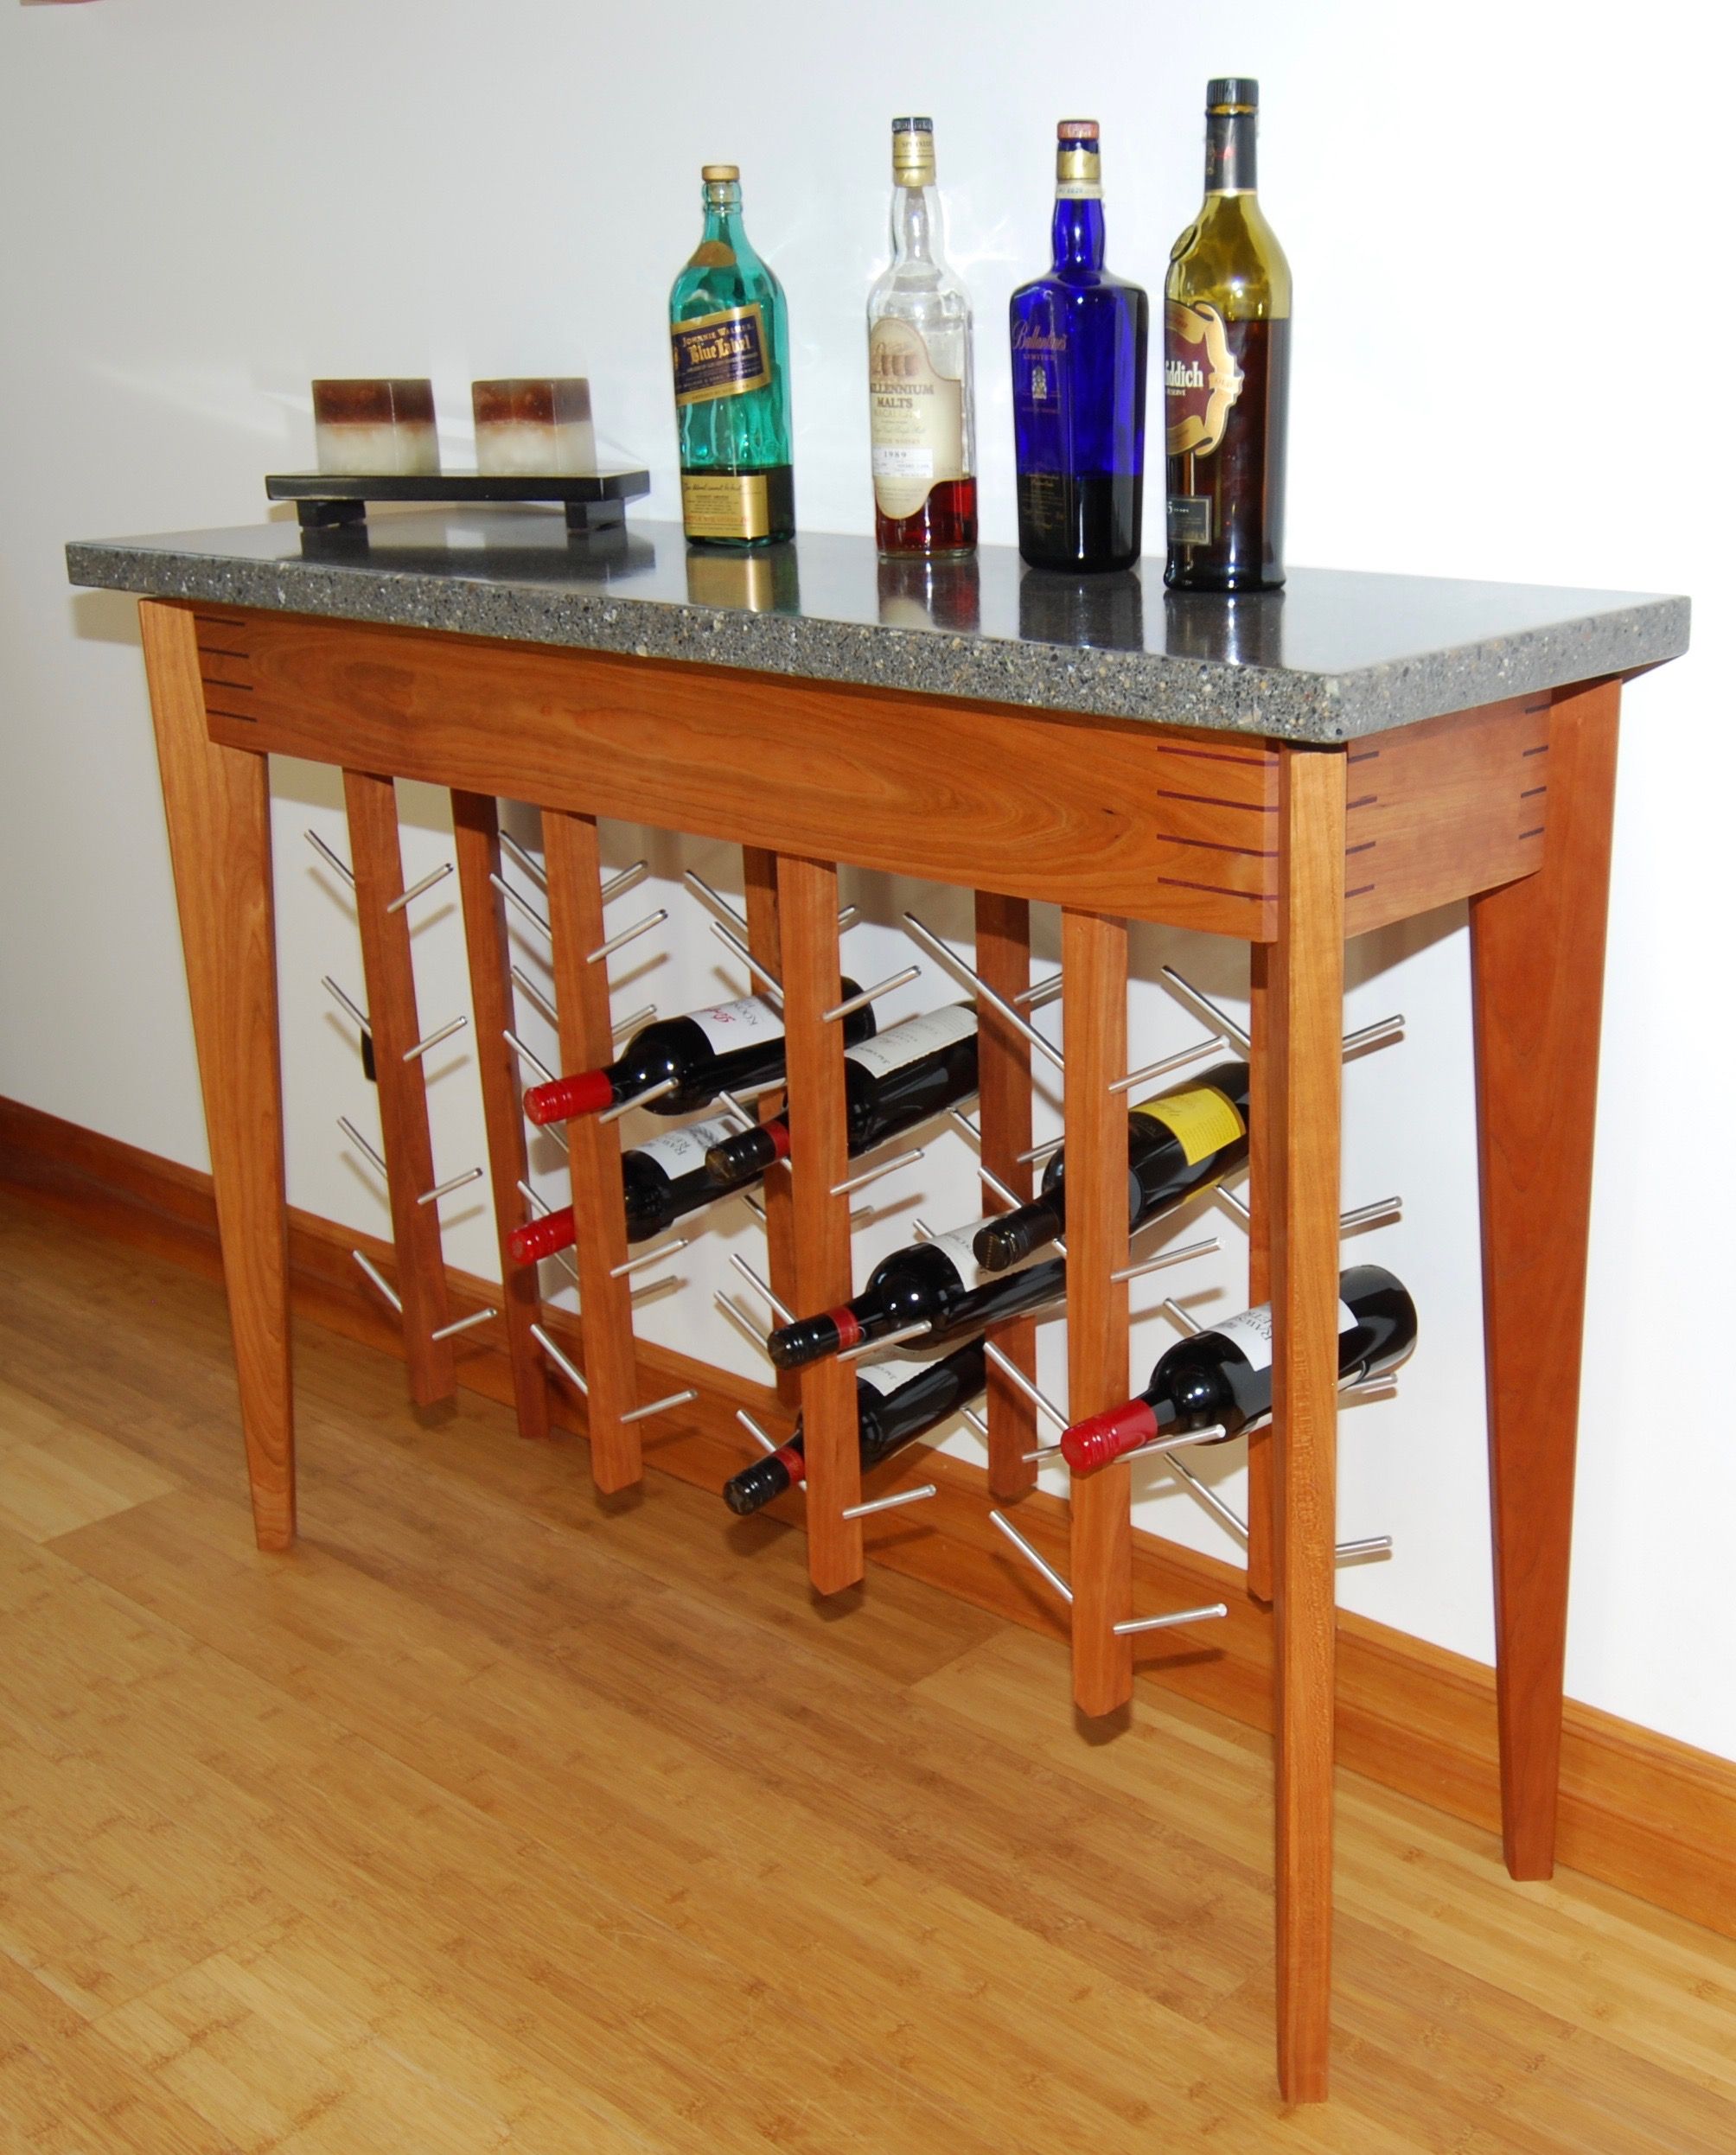 Buy a Custom Made Wine Rack, made to order from Highlands Furniture